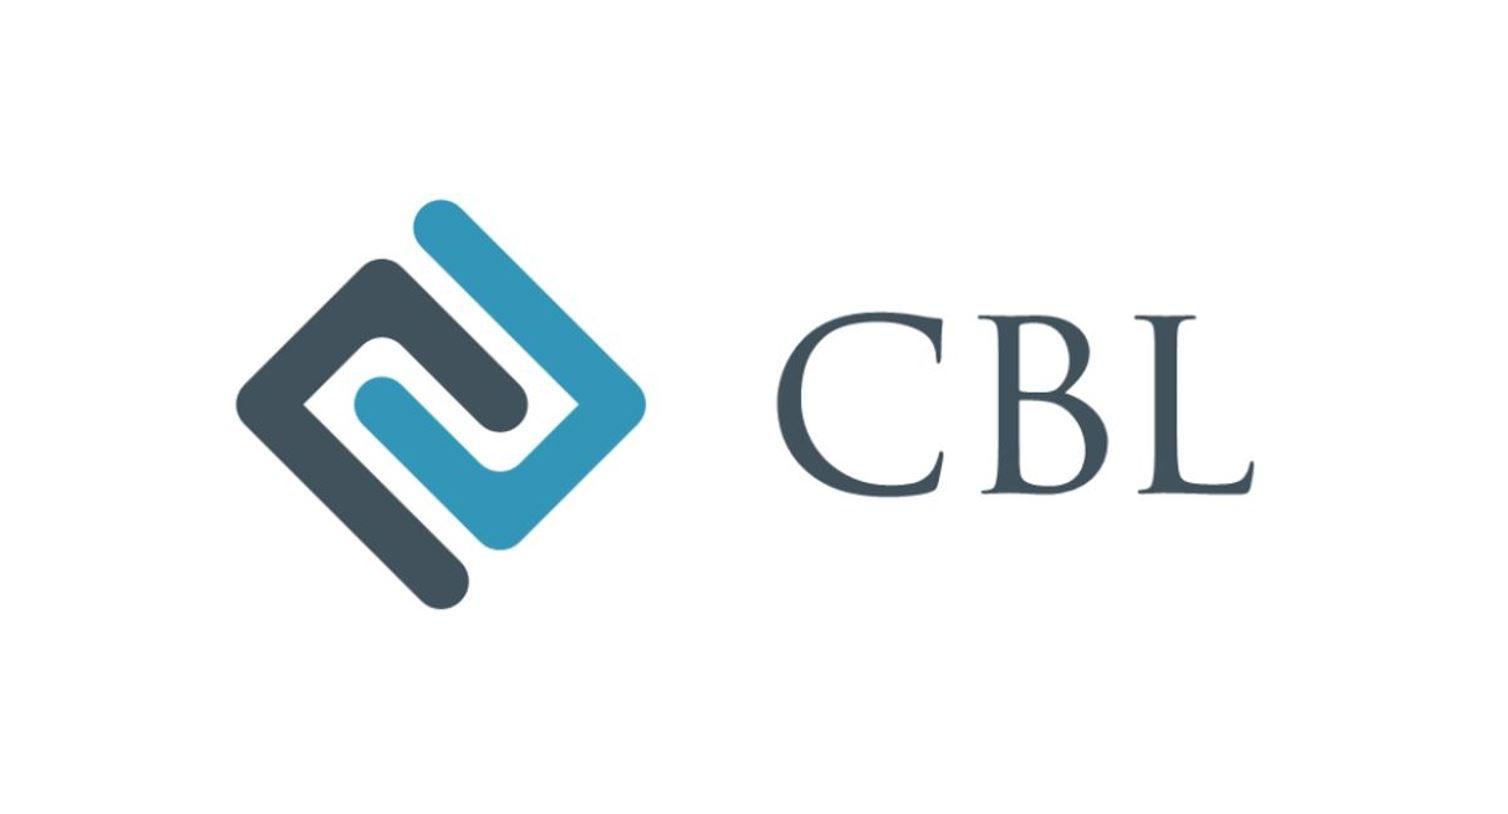 CBL Logo - Independent review finds the RBNZ had concerns about CBL Insurance's ...